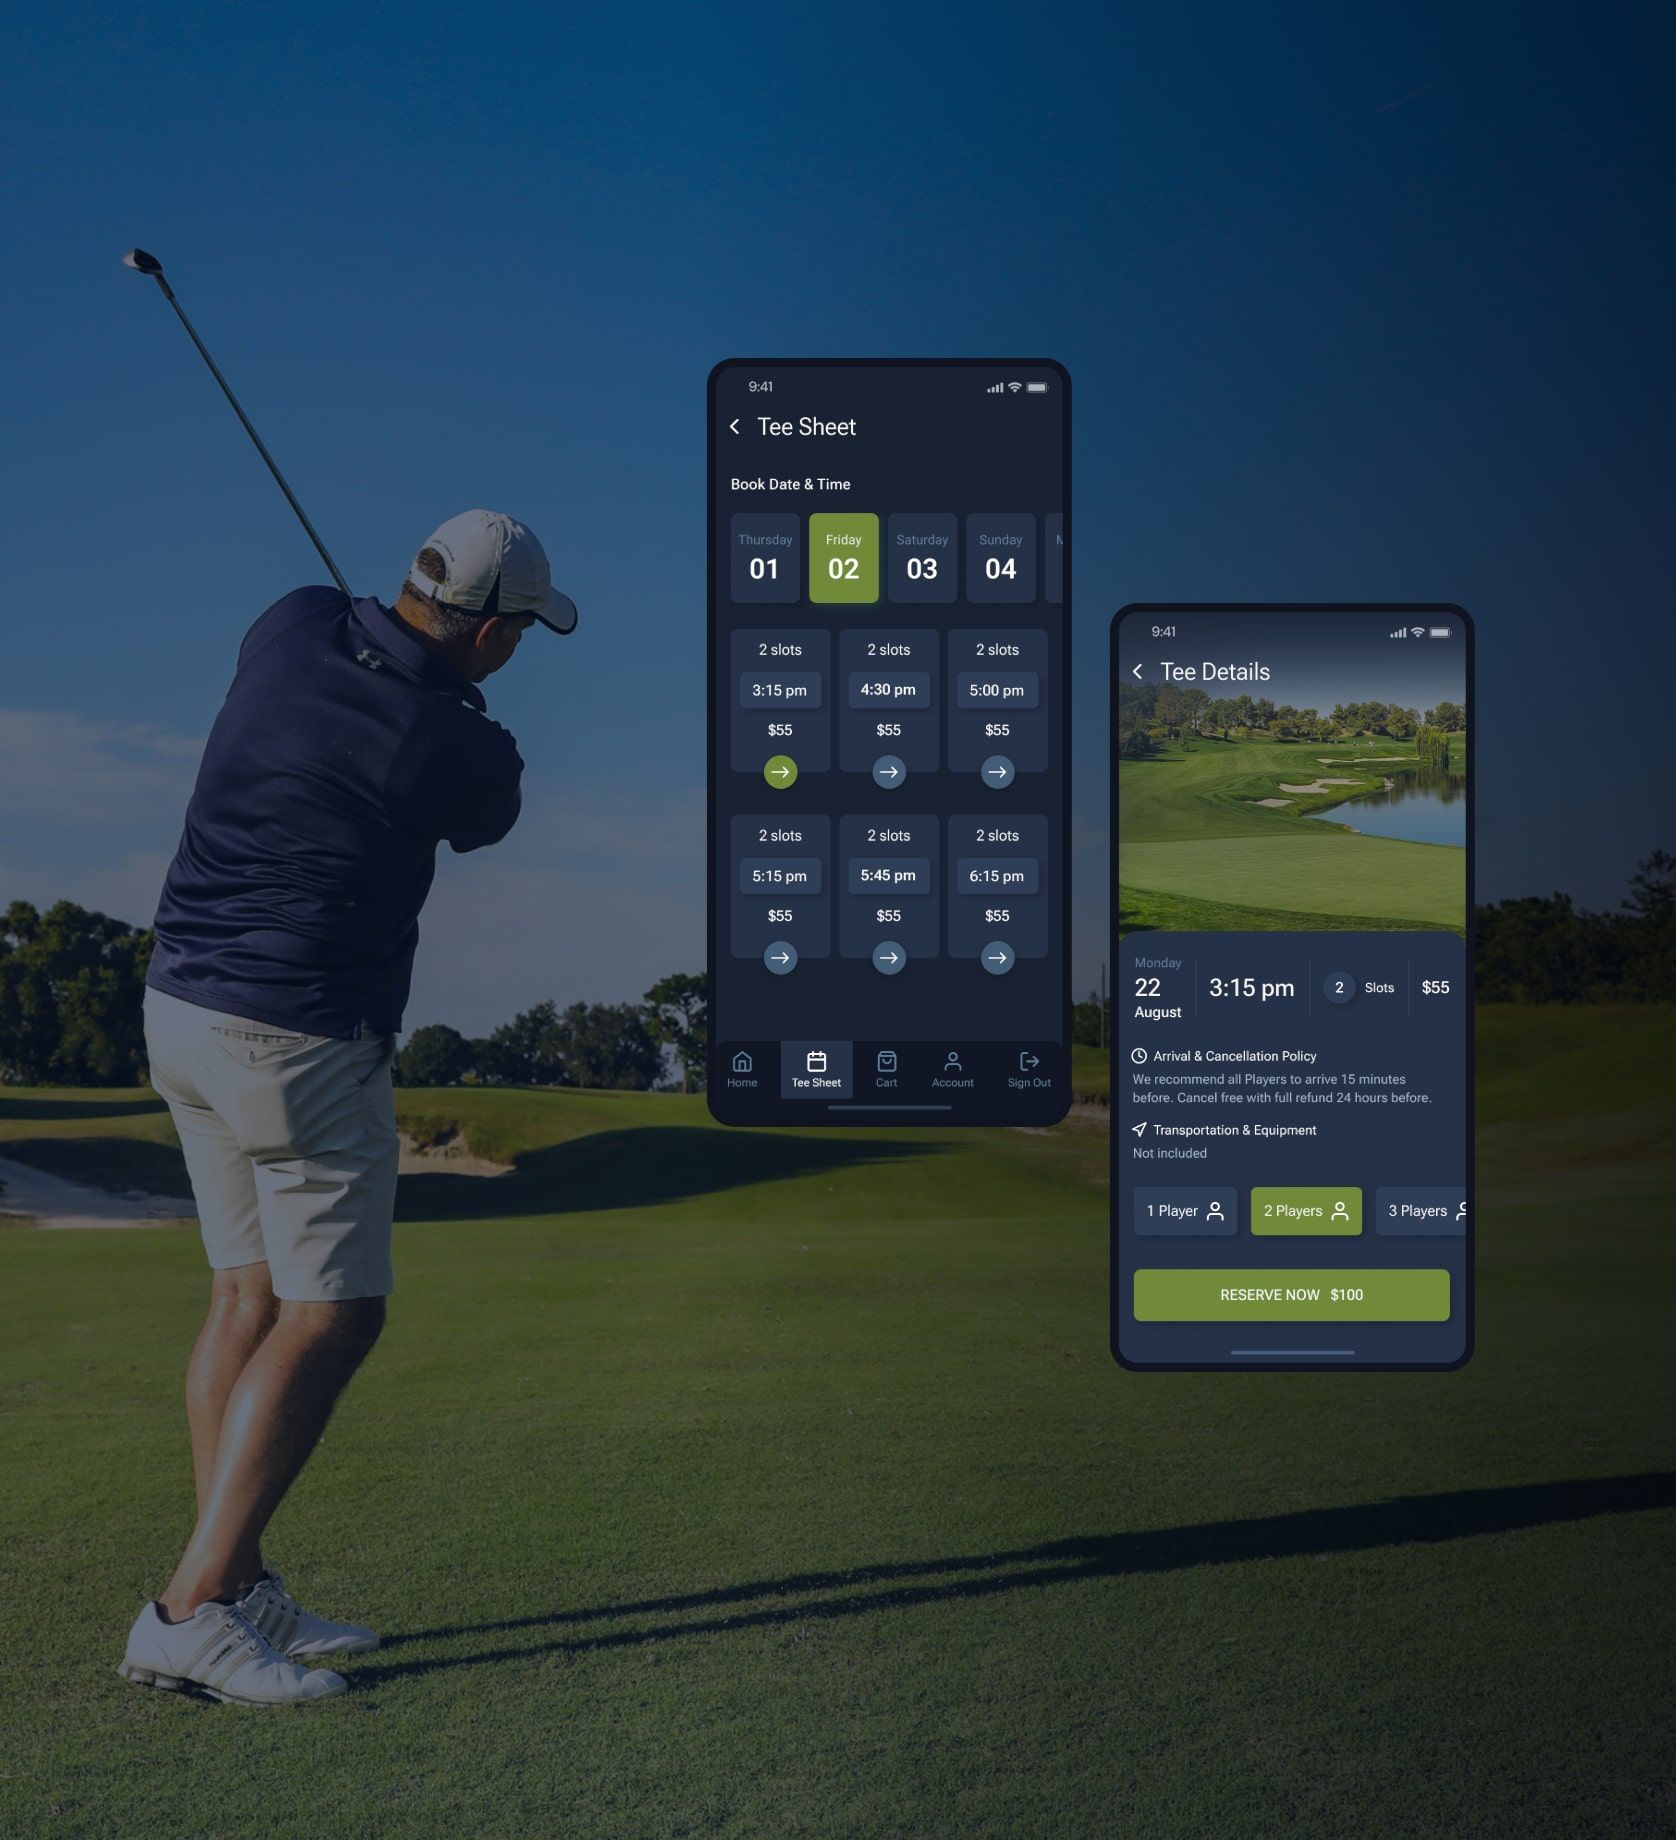 Golf App with tee booking and tee details screens.